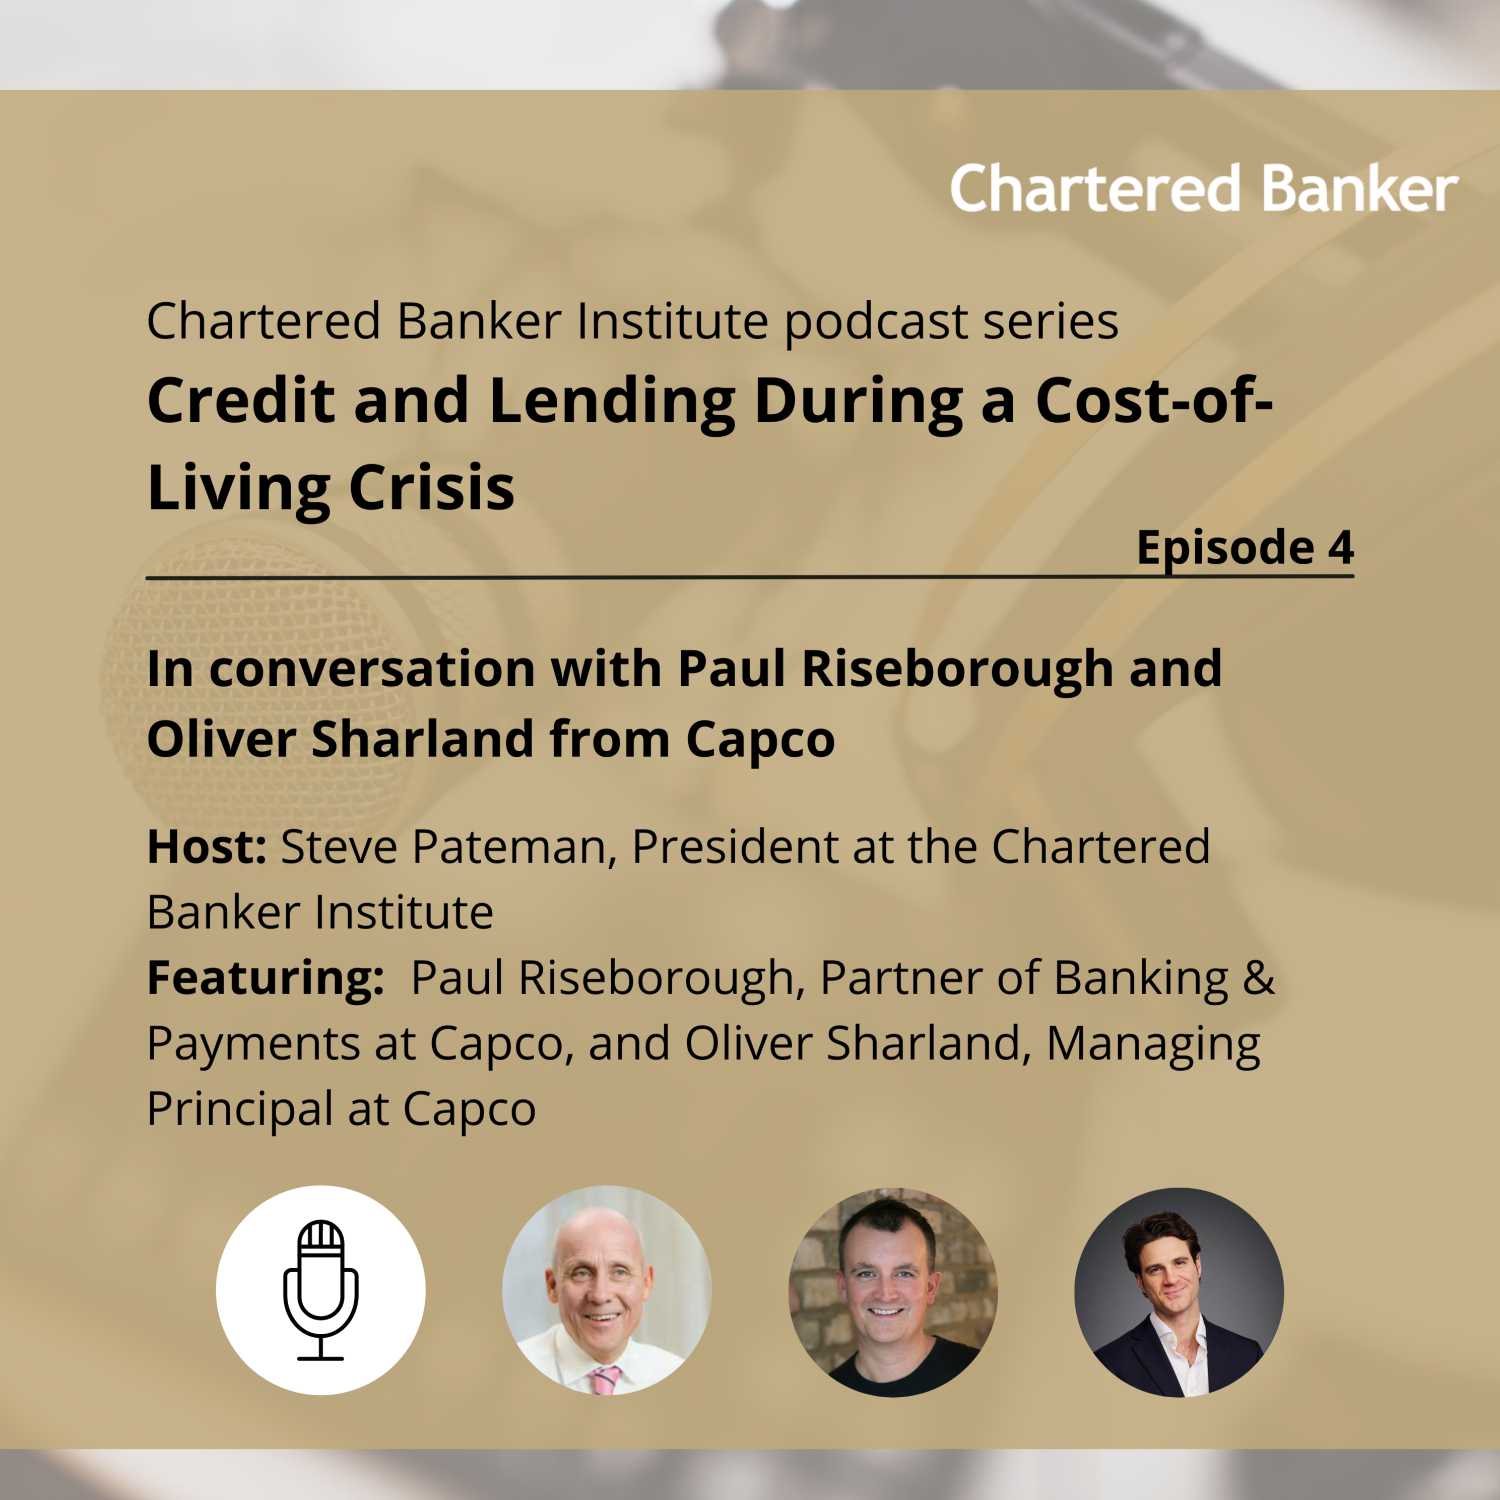 S1 E4 Credit and Lending During a Cost-of-Living Crisis, In conversation with Paul Riseborough and Oliver Sharland from Capco